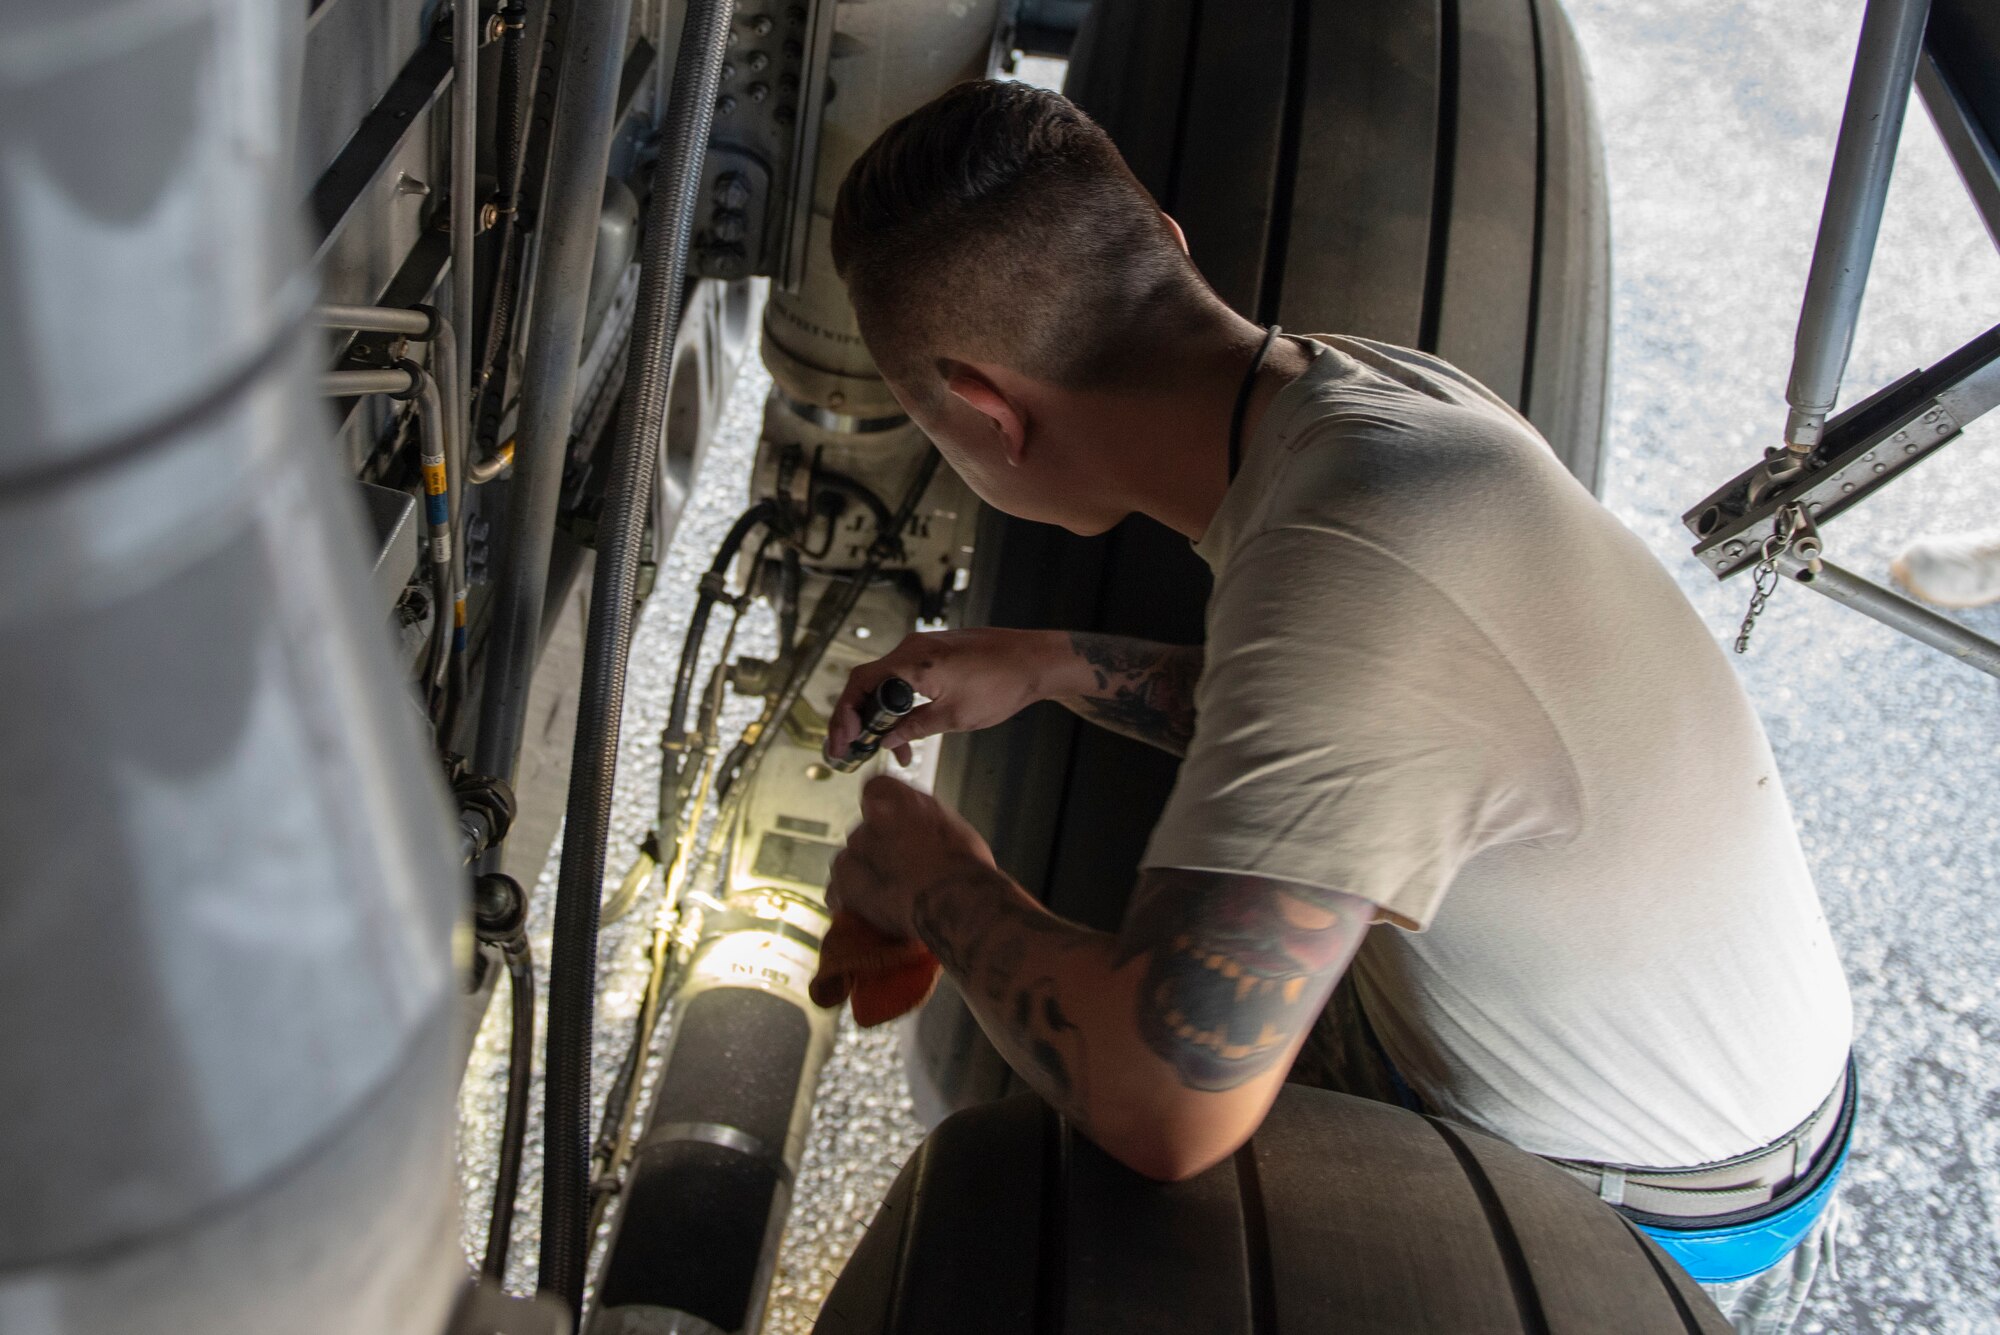 Staff Sgt. Matthew Haston, 374th Aircraft Maintenance Squadron electrical and environmental systems craftsman, looks over the tires of a C-130J Super Hercules during a pre-flight inspection during Operation Christmas Drop 2018 at Andersen Air Force Base, Guam, Dec. 9, 2018.